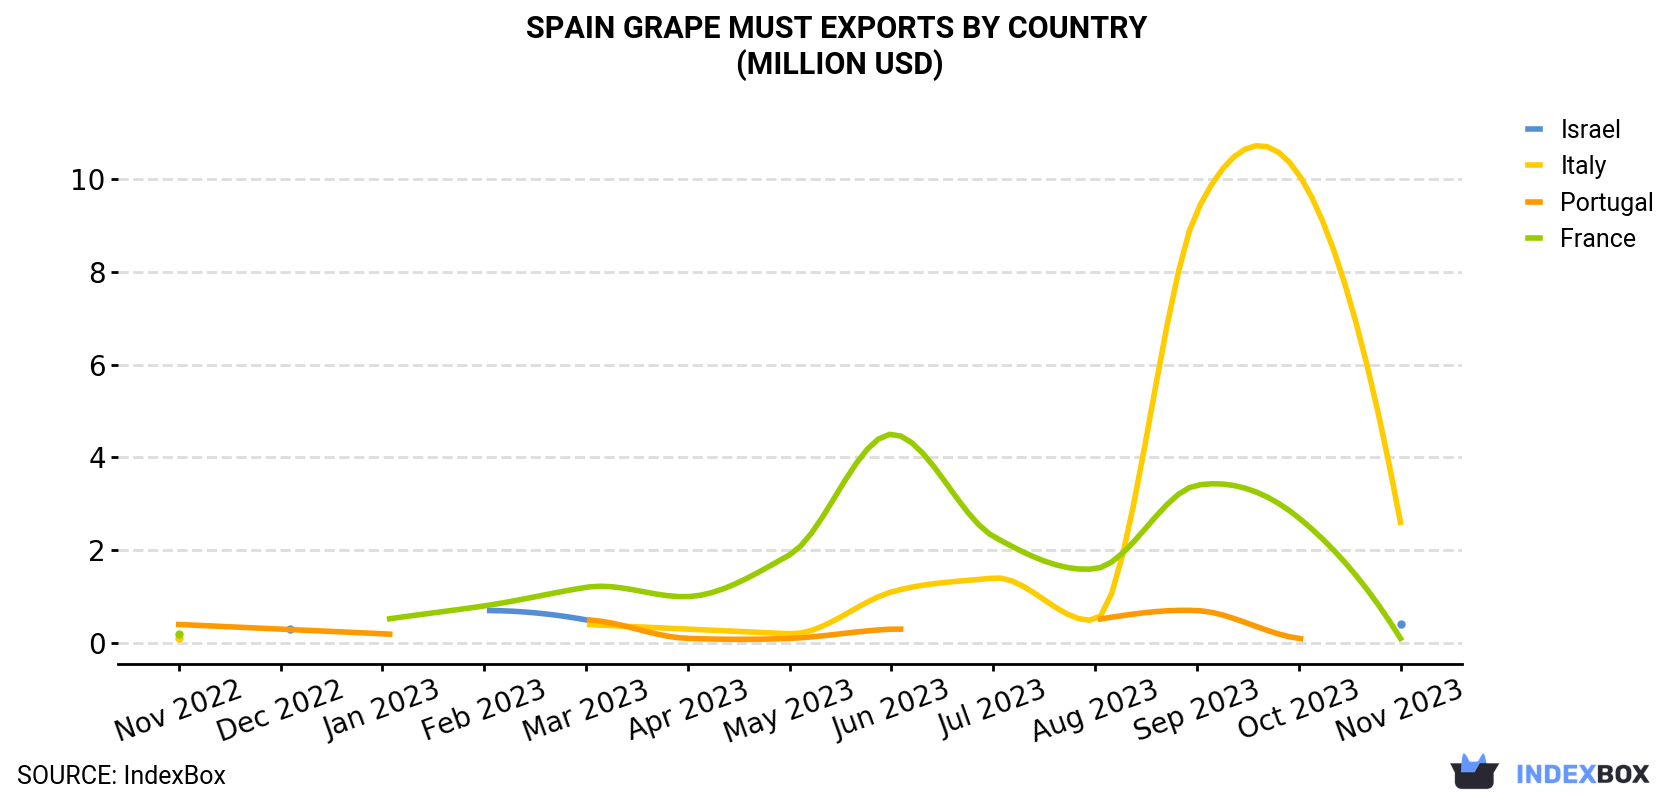 Spain Grape Must Exports By Country (Million USD)